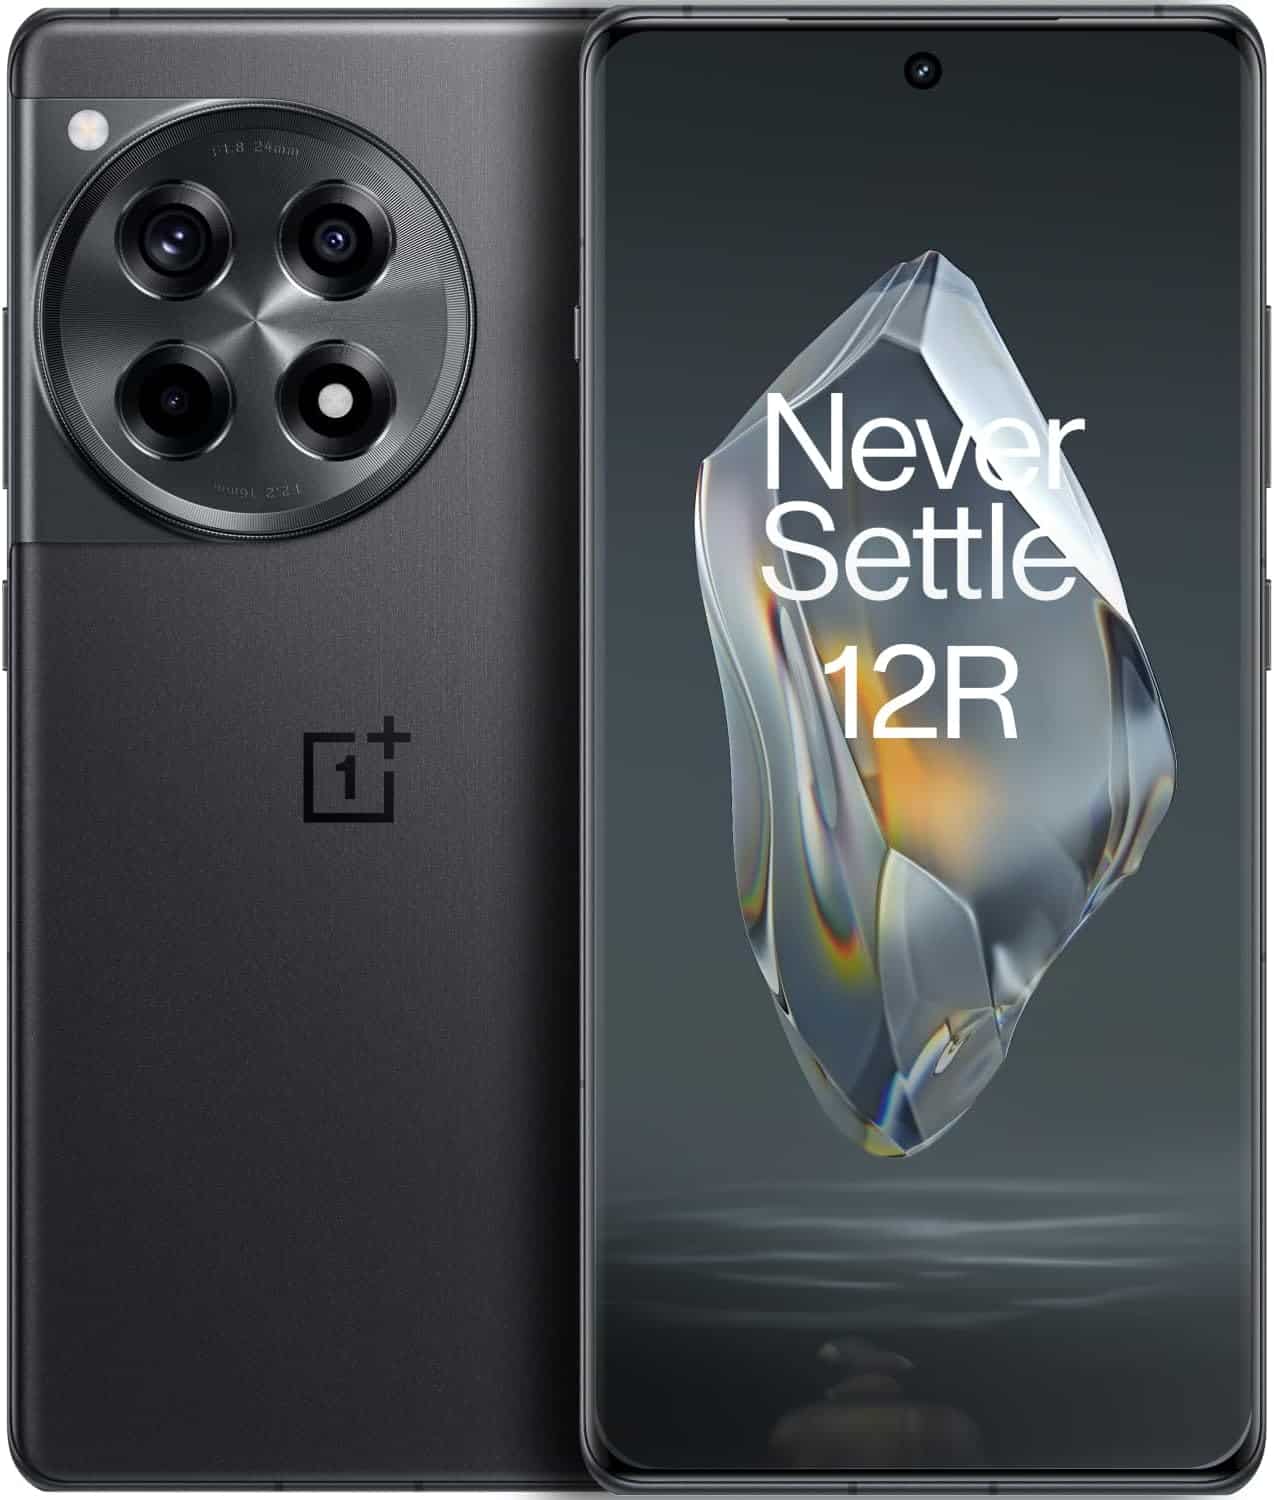 The OnePlus 12R is showcased with a camera and a front camera.